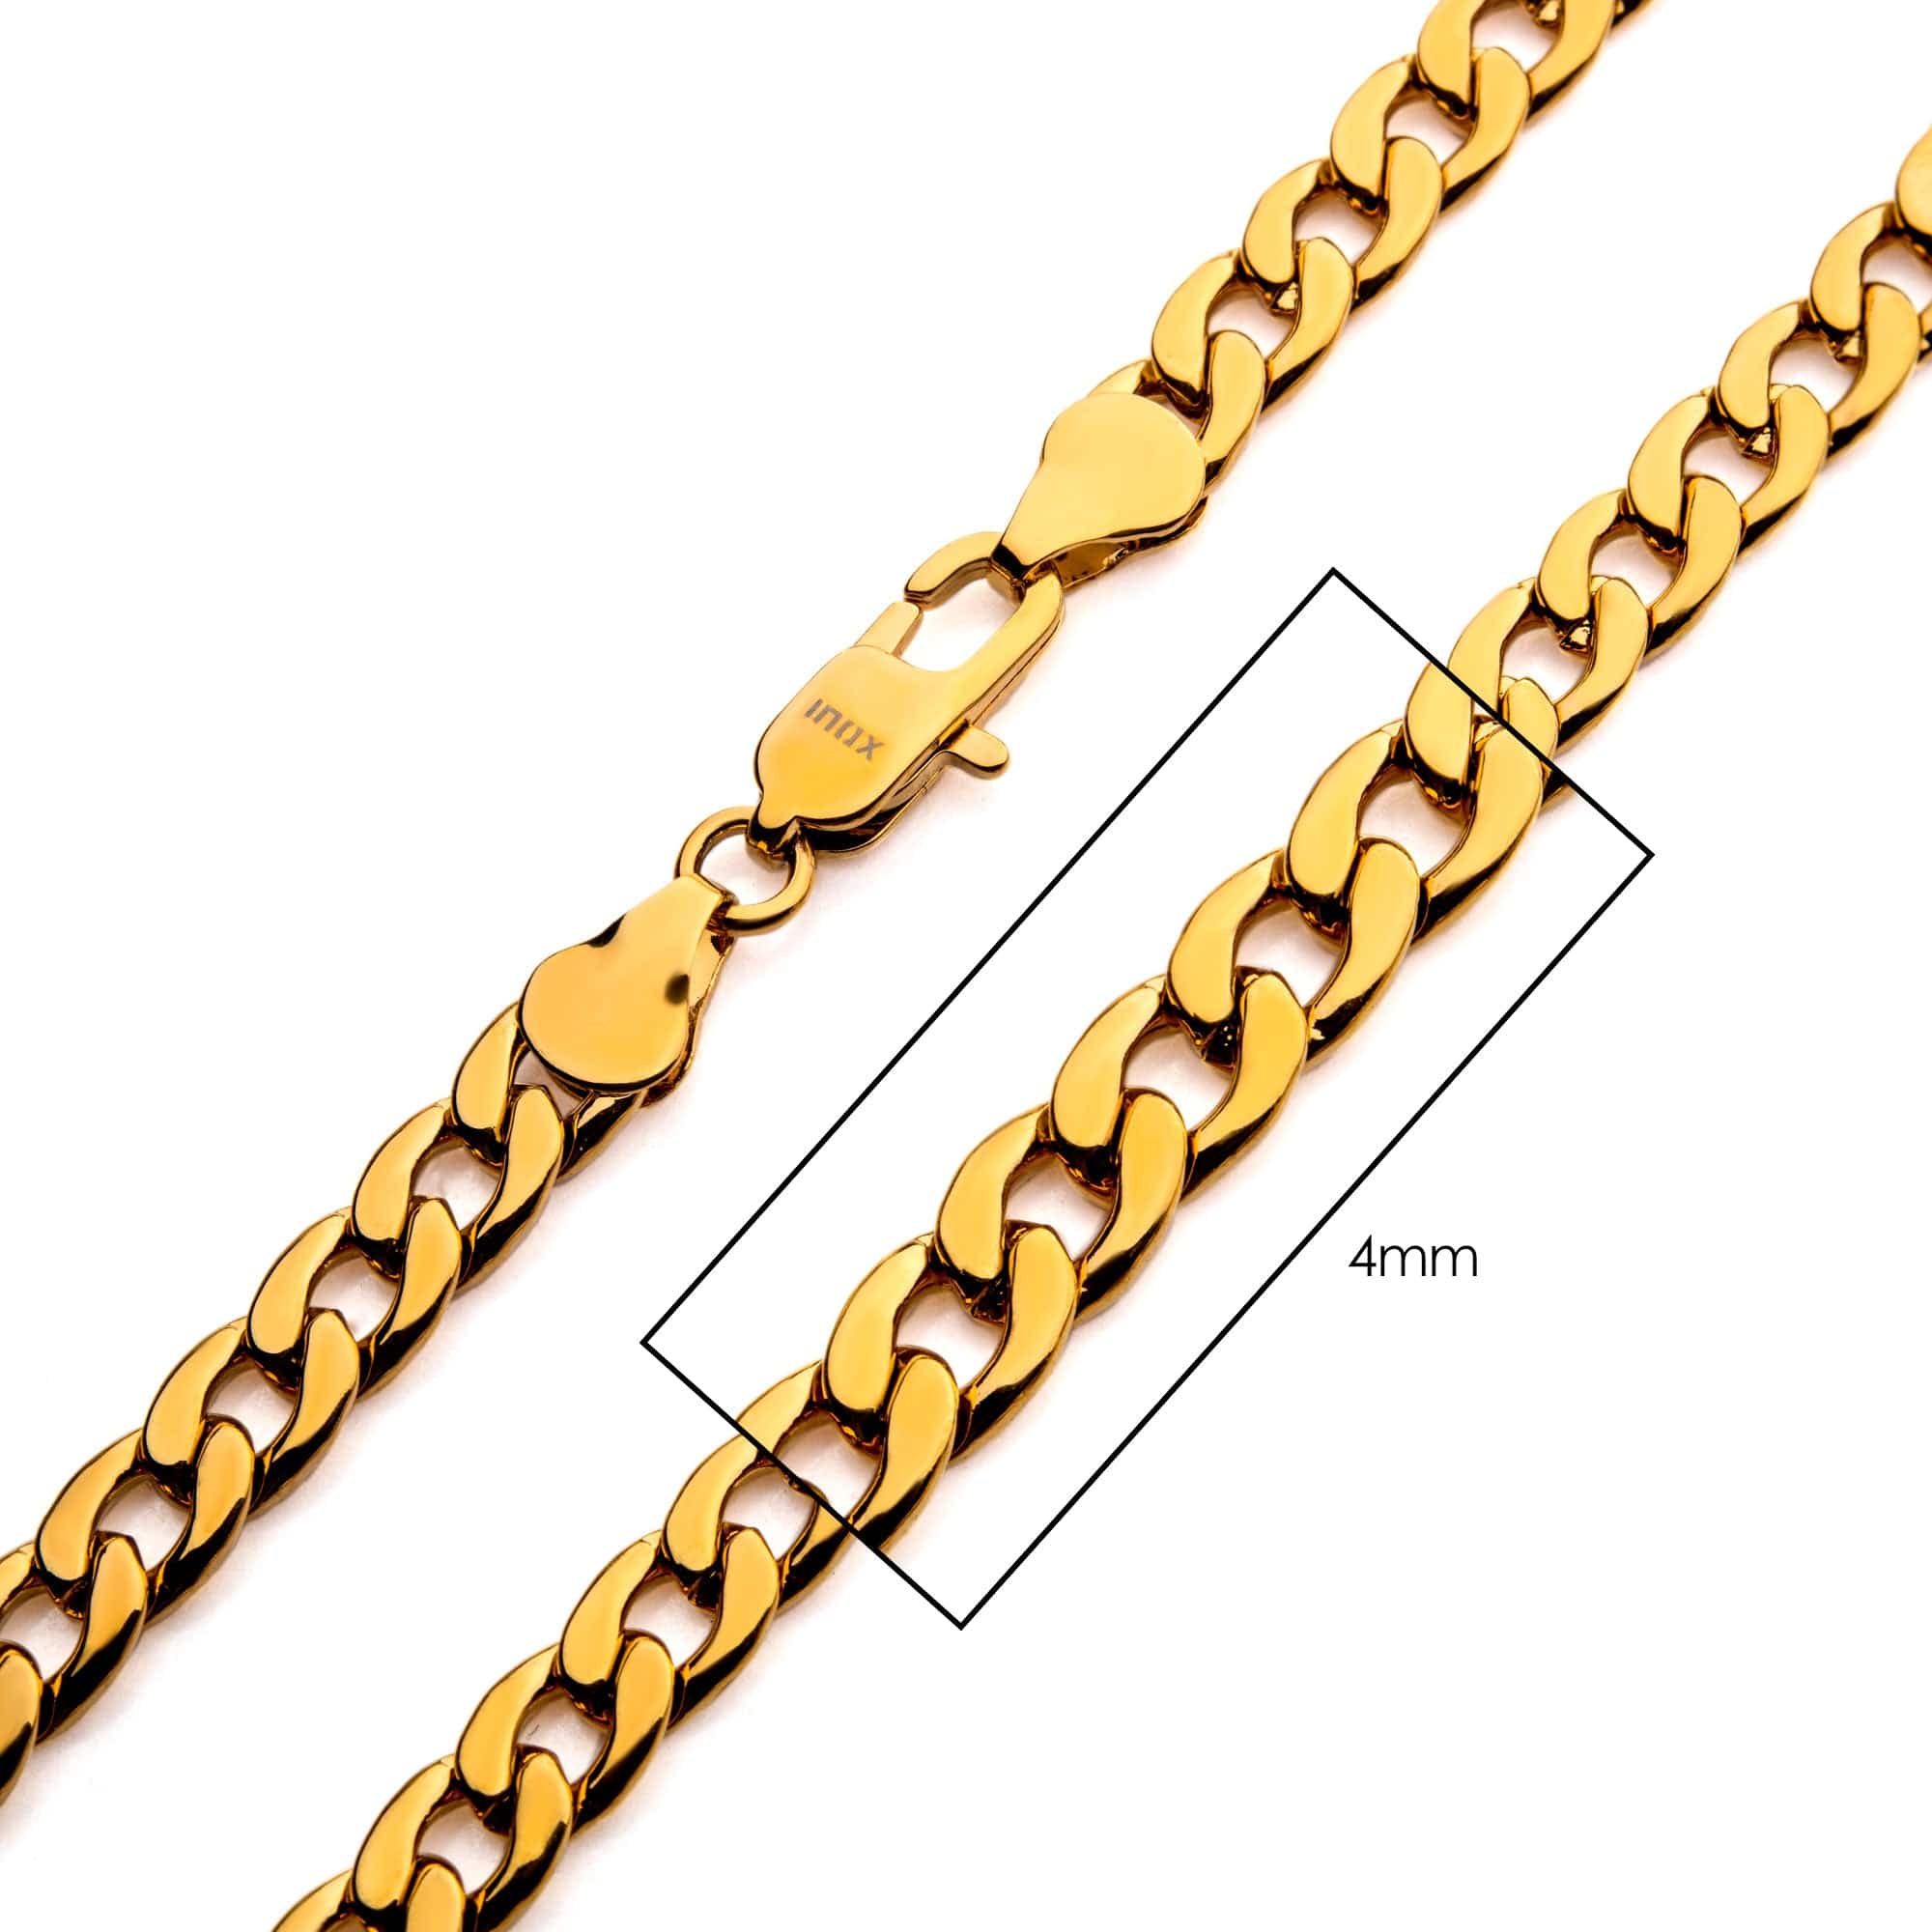 INOX JEWELRY Accessories 18K Gold Ion Plated Stainless Steel 4mm Curb Chain